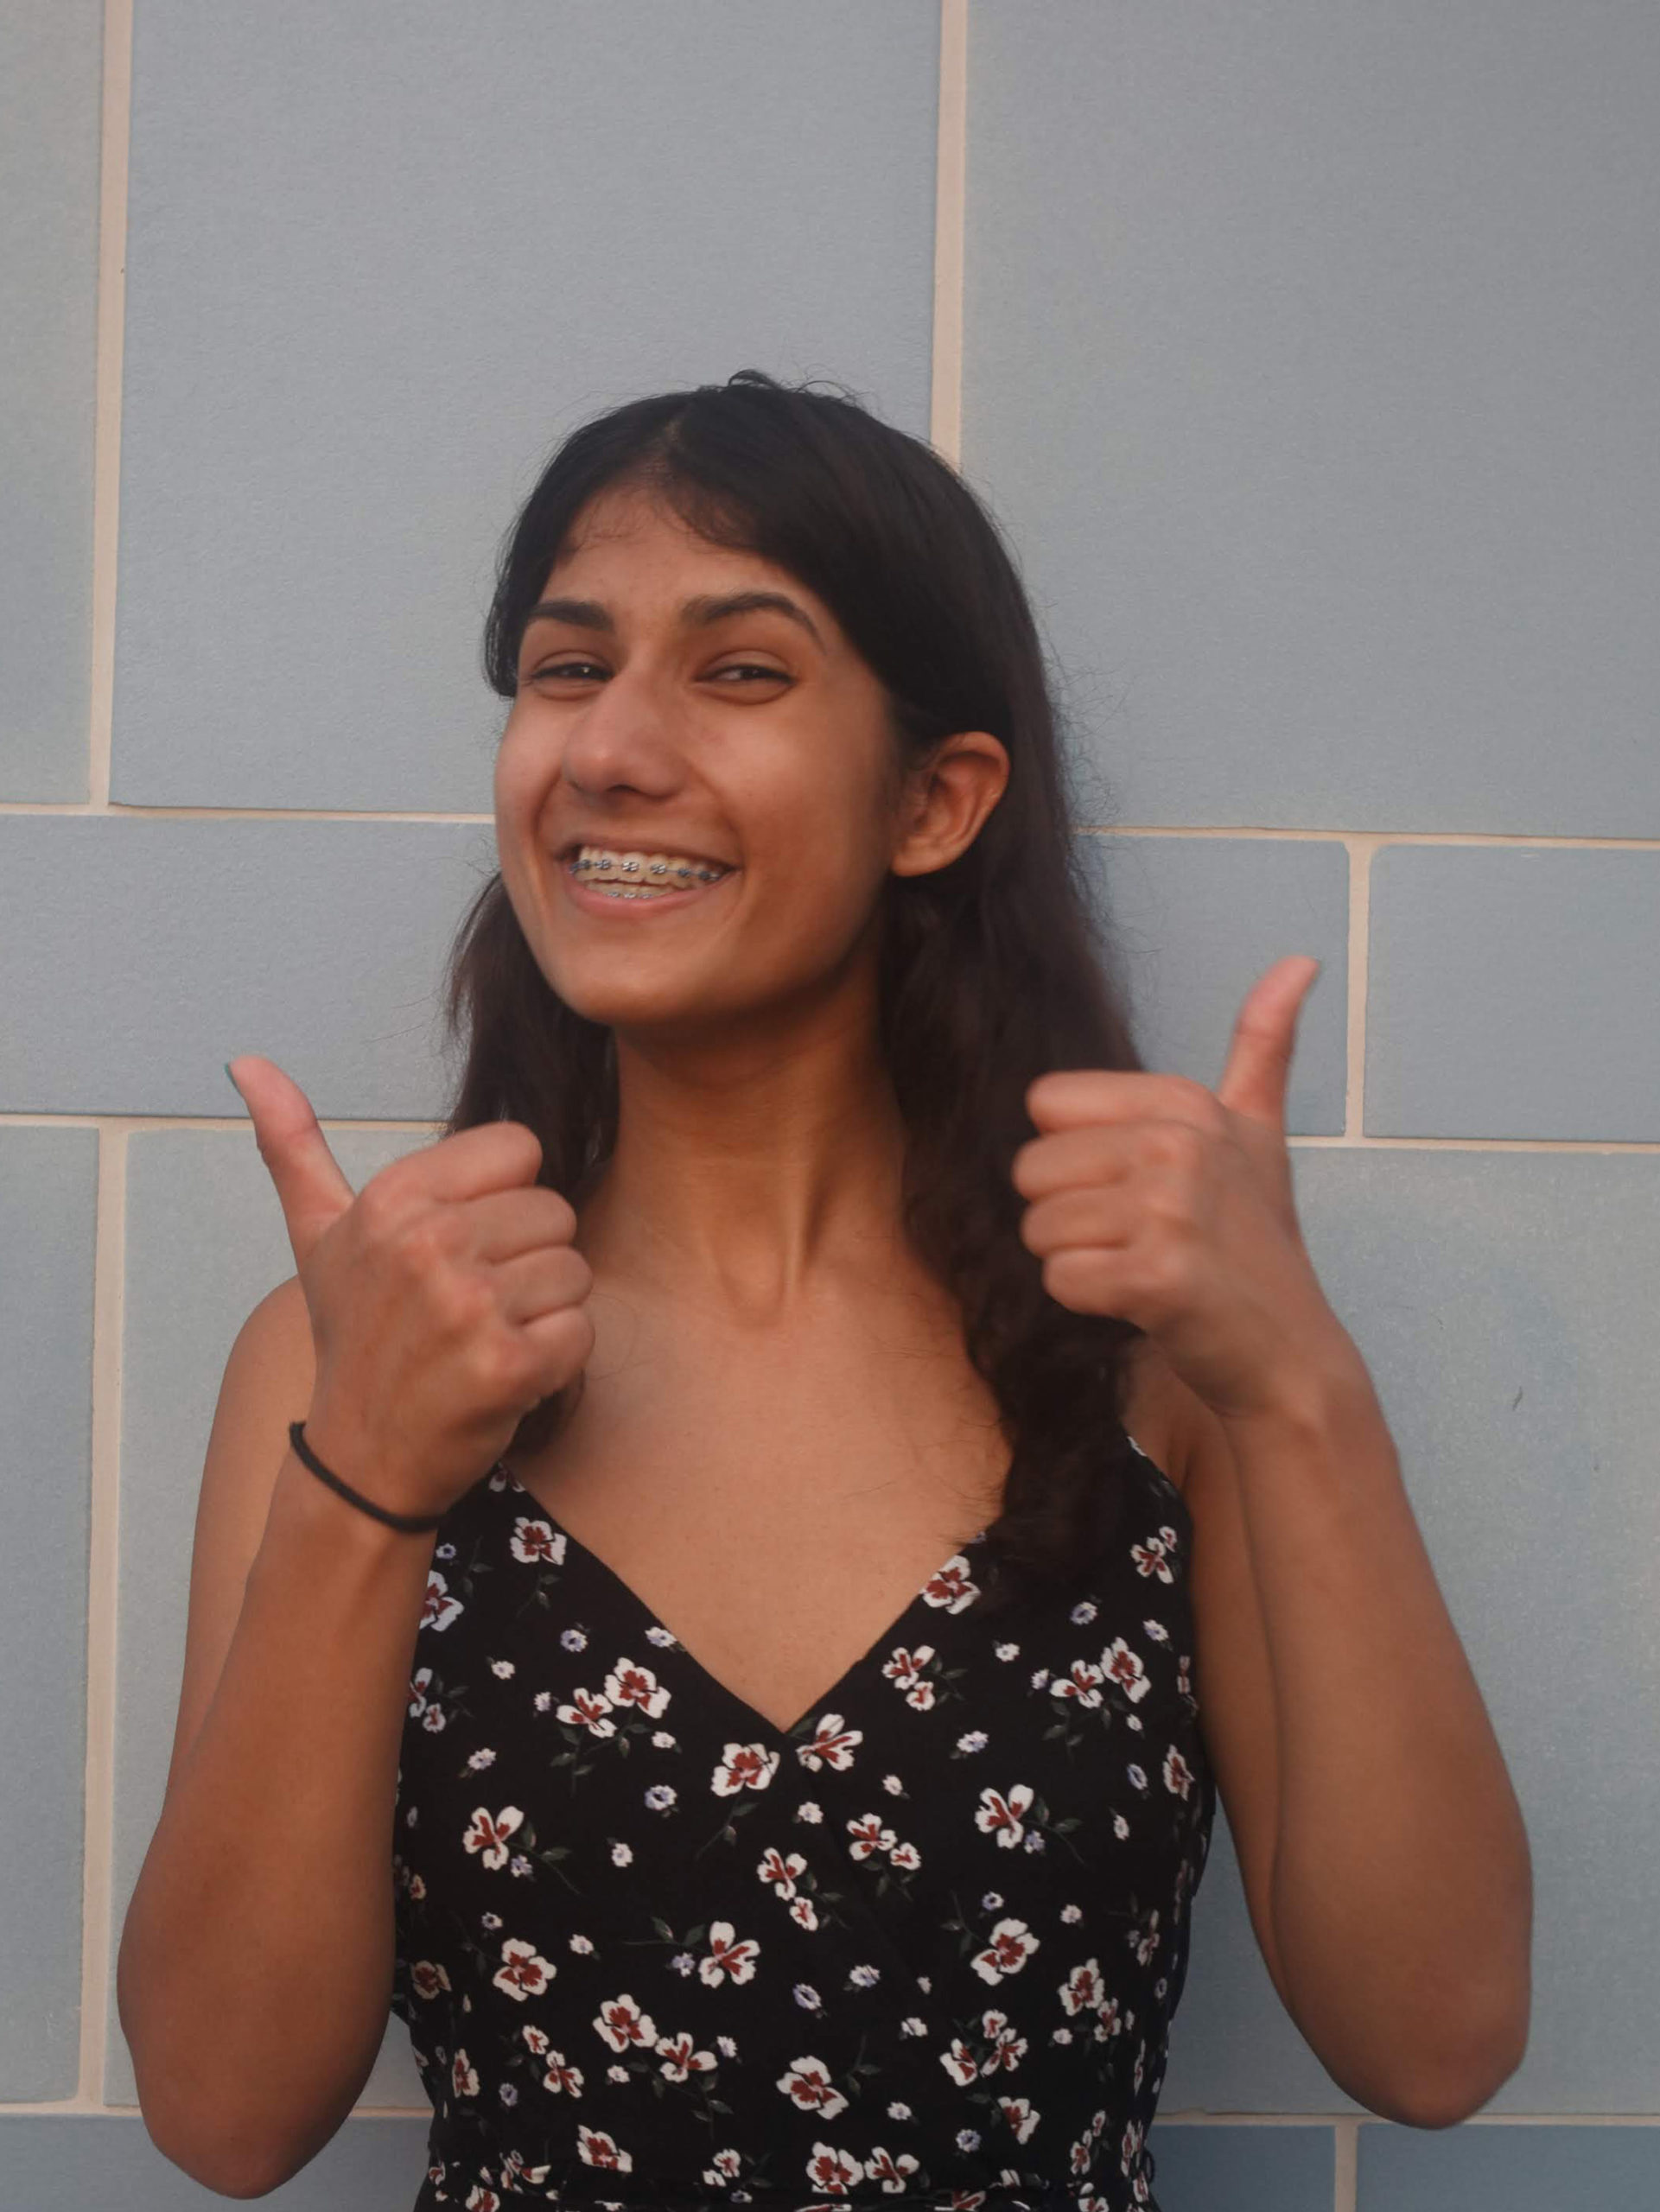 Diyya smiling at the camera with two thumbs up